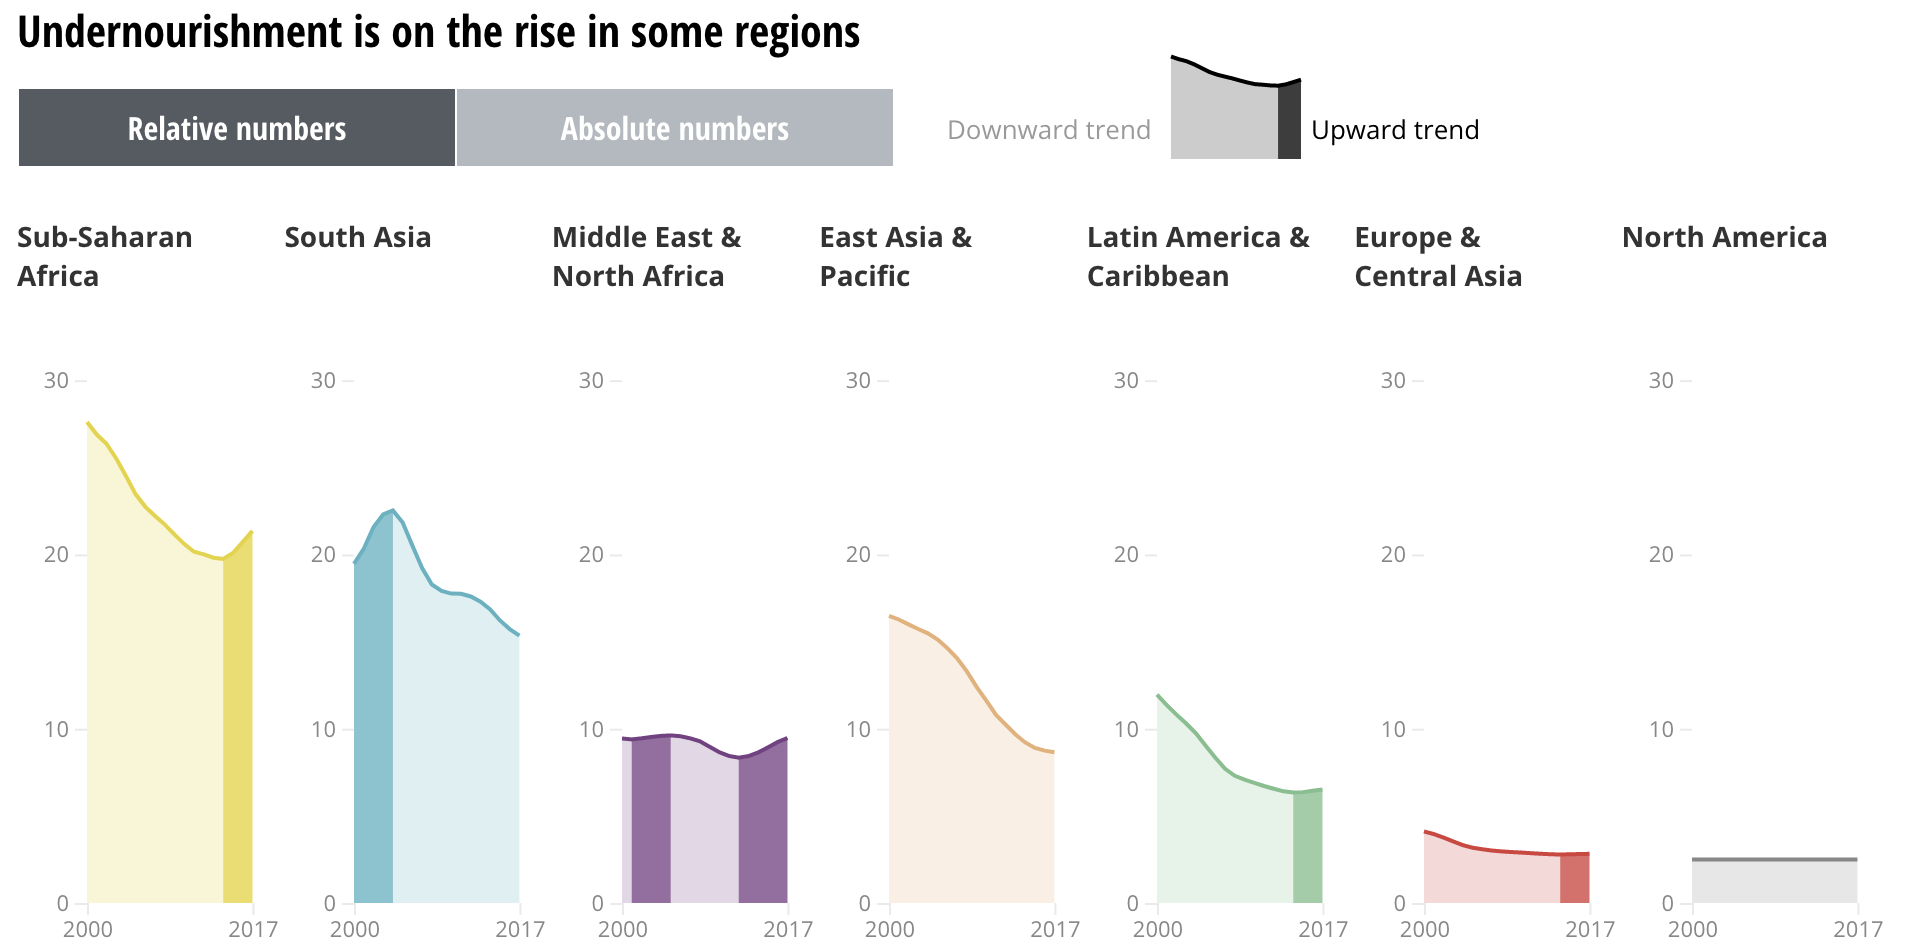 A series of area charts showing the trend in undernourishment rates in 7 regions of the world